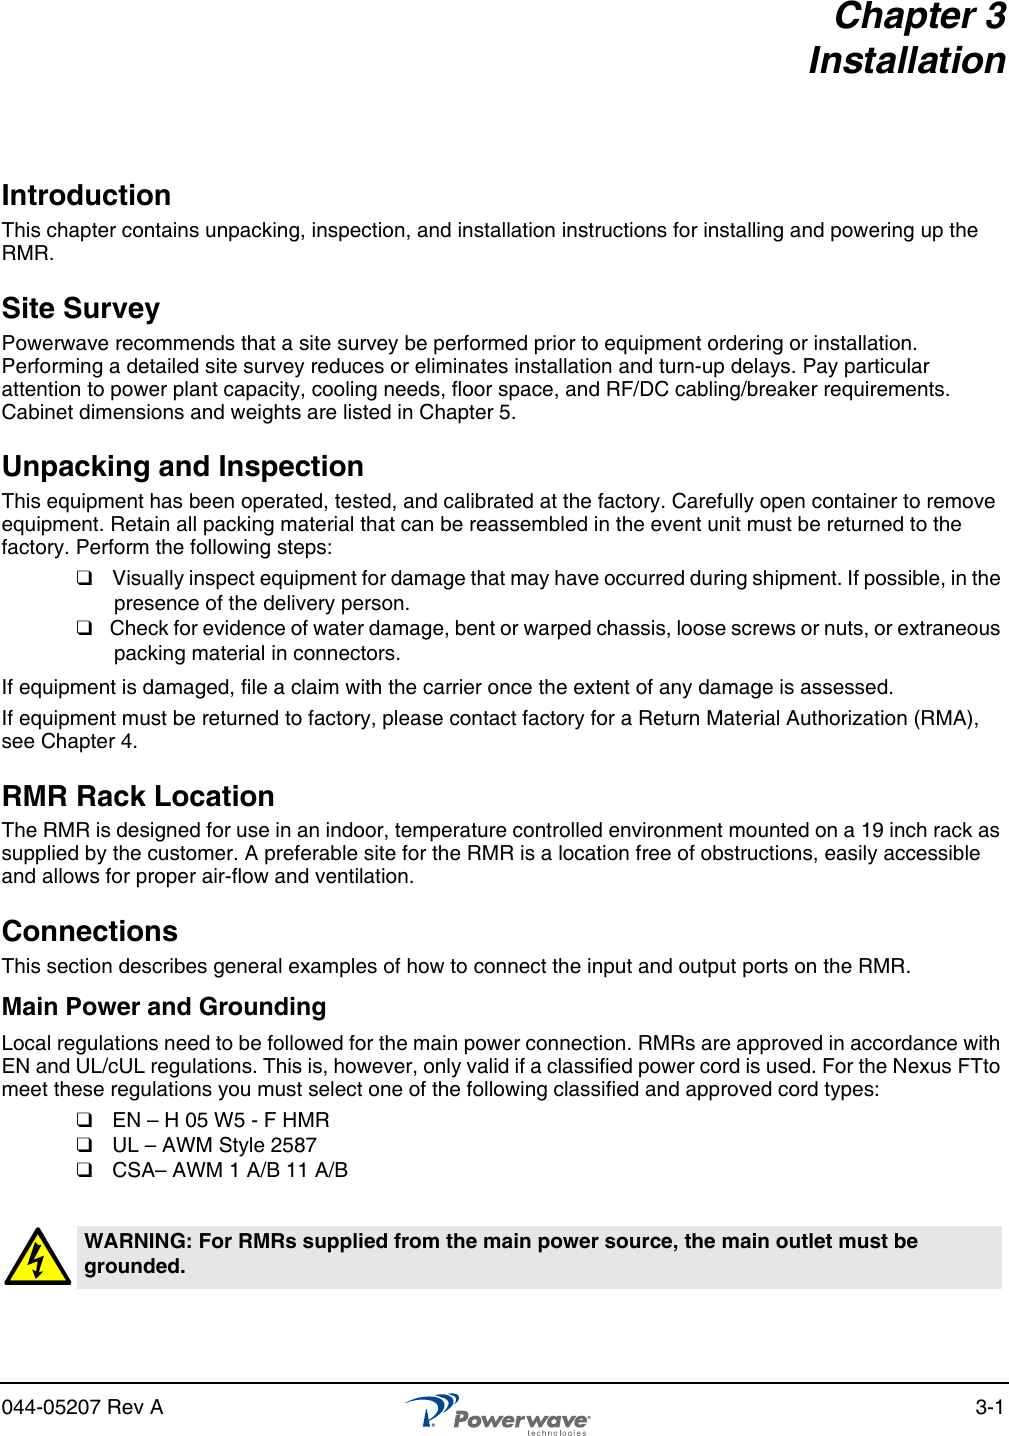 044-05207 Rev A 3-1Chapter 3InstallationIntroductionThis chapter contains unpacking, inspection, and installation instructions for installing and powering up the RMR.Site SurveyPowerwave recommends that a site survey be performed prior to equipment ordering or installation. Performing a detailed site survey reduces or eliminates installation and turn-up delays. Pay particular attention to power plant capacity, cooling needs, floor space, and RF/DC cabling/breaker requirements. Cabinet dimensions and weights are listed in Chapter 5.Unpacking and InspectionThis equipment has been operated, tested, and calibrated at the factory. Carefully open container to remove equipment. Retain all packing material that can be reassembled in the event unit must be returned to the factory. Perform the following steps:❑  Visually inspect equipment for damage that may have occurred during shipment. If possible, in the presence of the delivery person.❑  Check for evidence of water damage, bent or warped chassis, loose screws or nuts, or extraneous packing material in connectors.If equipment is damaged, file a claim with the carrier once the extent of any damage is assessed.If equipment must be returned to factory, please contact factory for a Return Material Authorization (RMA), see Chapter 4.RMR Rack LocationThe RMR is designed for use in an indoor, temperature controlled environment mounted on a 19 inch rack as supplied by the customer. A preferable site for the RMR is a location free of obstructions, easily accessible and allows for proper air-flow and ventilation. ConnectionsThis section describes general examples of how to connect the input and output ports on the RMR. Main Power and GroundingLocal regulations need to be followed for the main power connection. RMRs are approved in accordance with EN and UL/cUL regulations. This is, however, only valid if a classified power cord is used. For the Nexus FTto meet these regulations you must select one of the following classified and approved cord types:❑  EN – H 05 W5 - F HMR❑  UL – AWM Style 2587❑  CSA– AWM 1 A/B 11 A/BWARNING: For RMRs supplied from the main power source, the main outlet must be grounded.